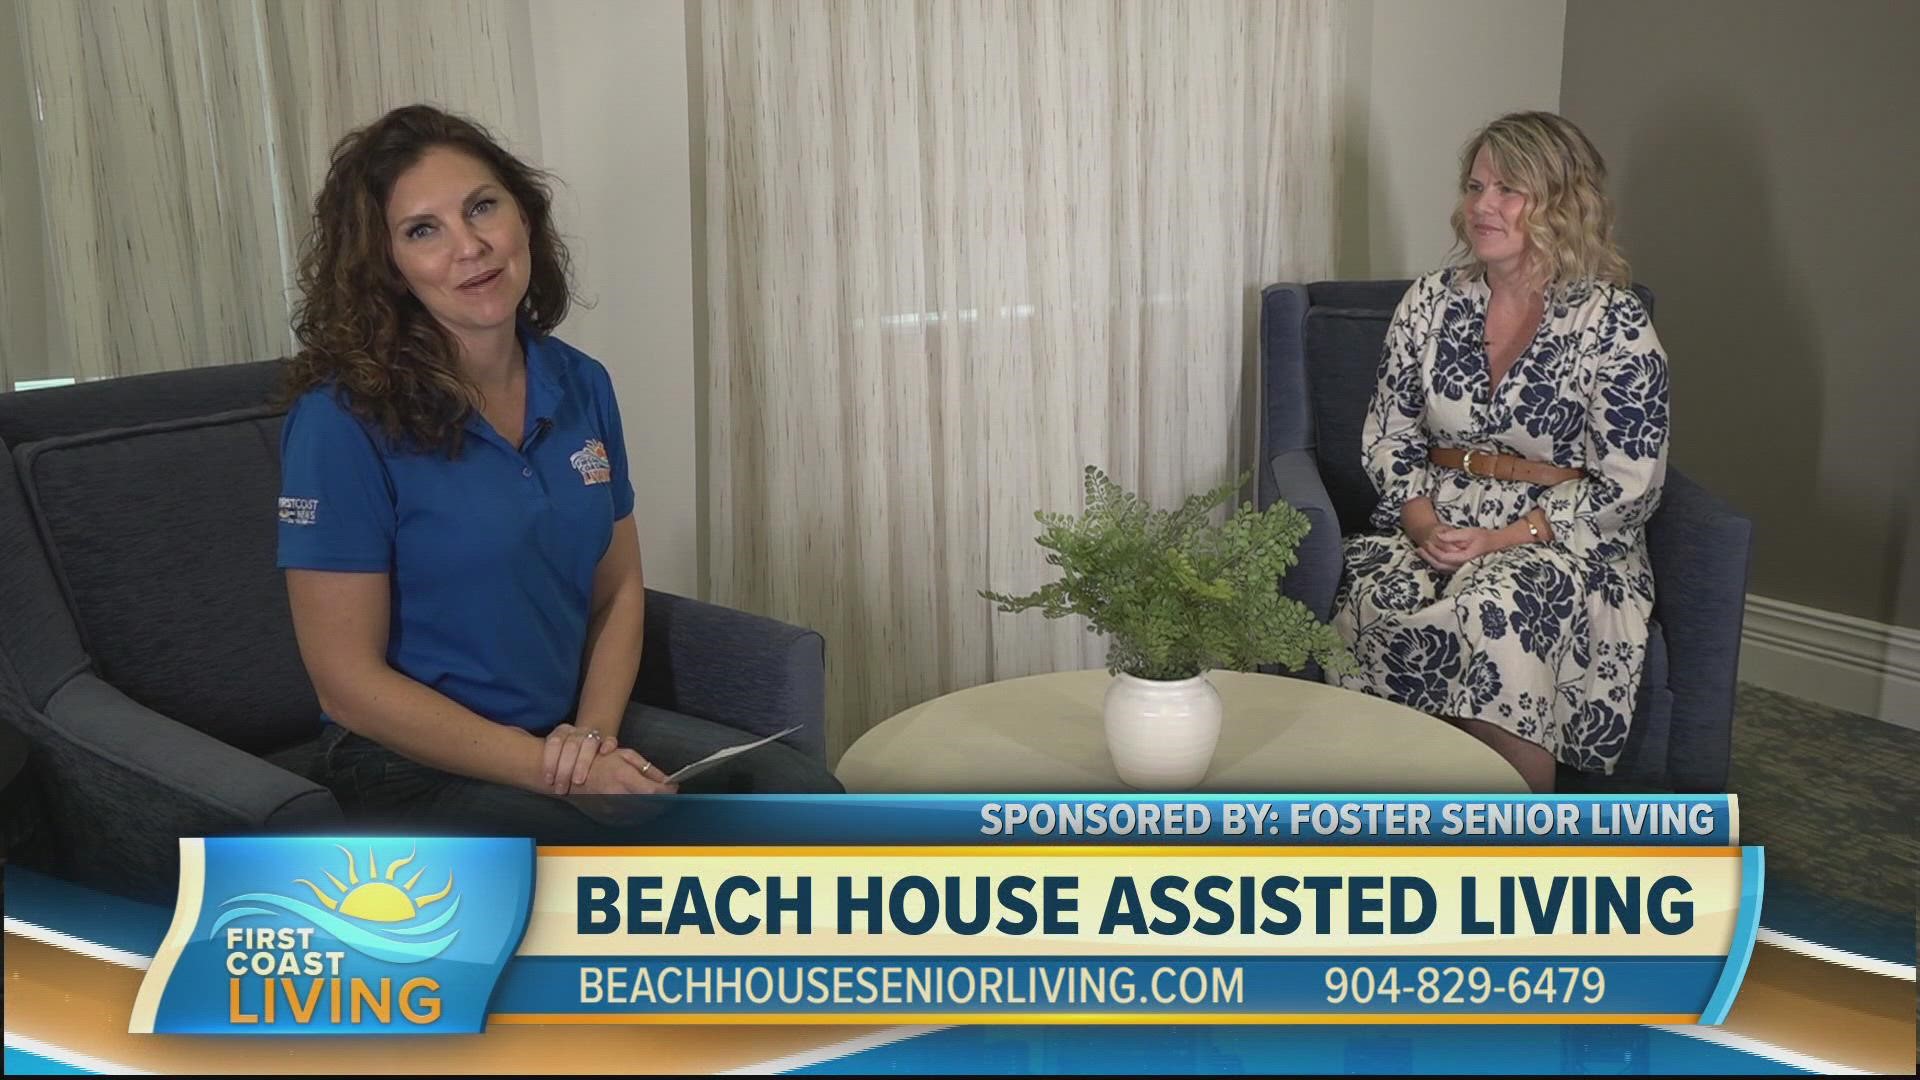 The Beach House sales specialist, Kris Holland fills us in on what makes The Beach House a "one stop shop" for residents looking to live life to the fullest.